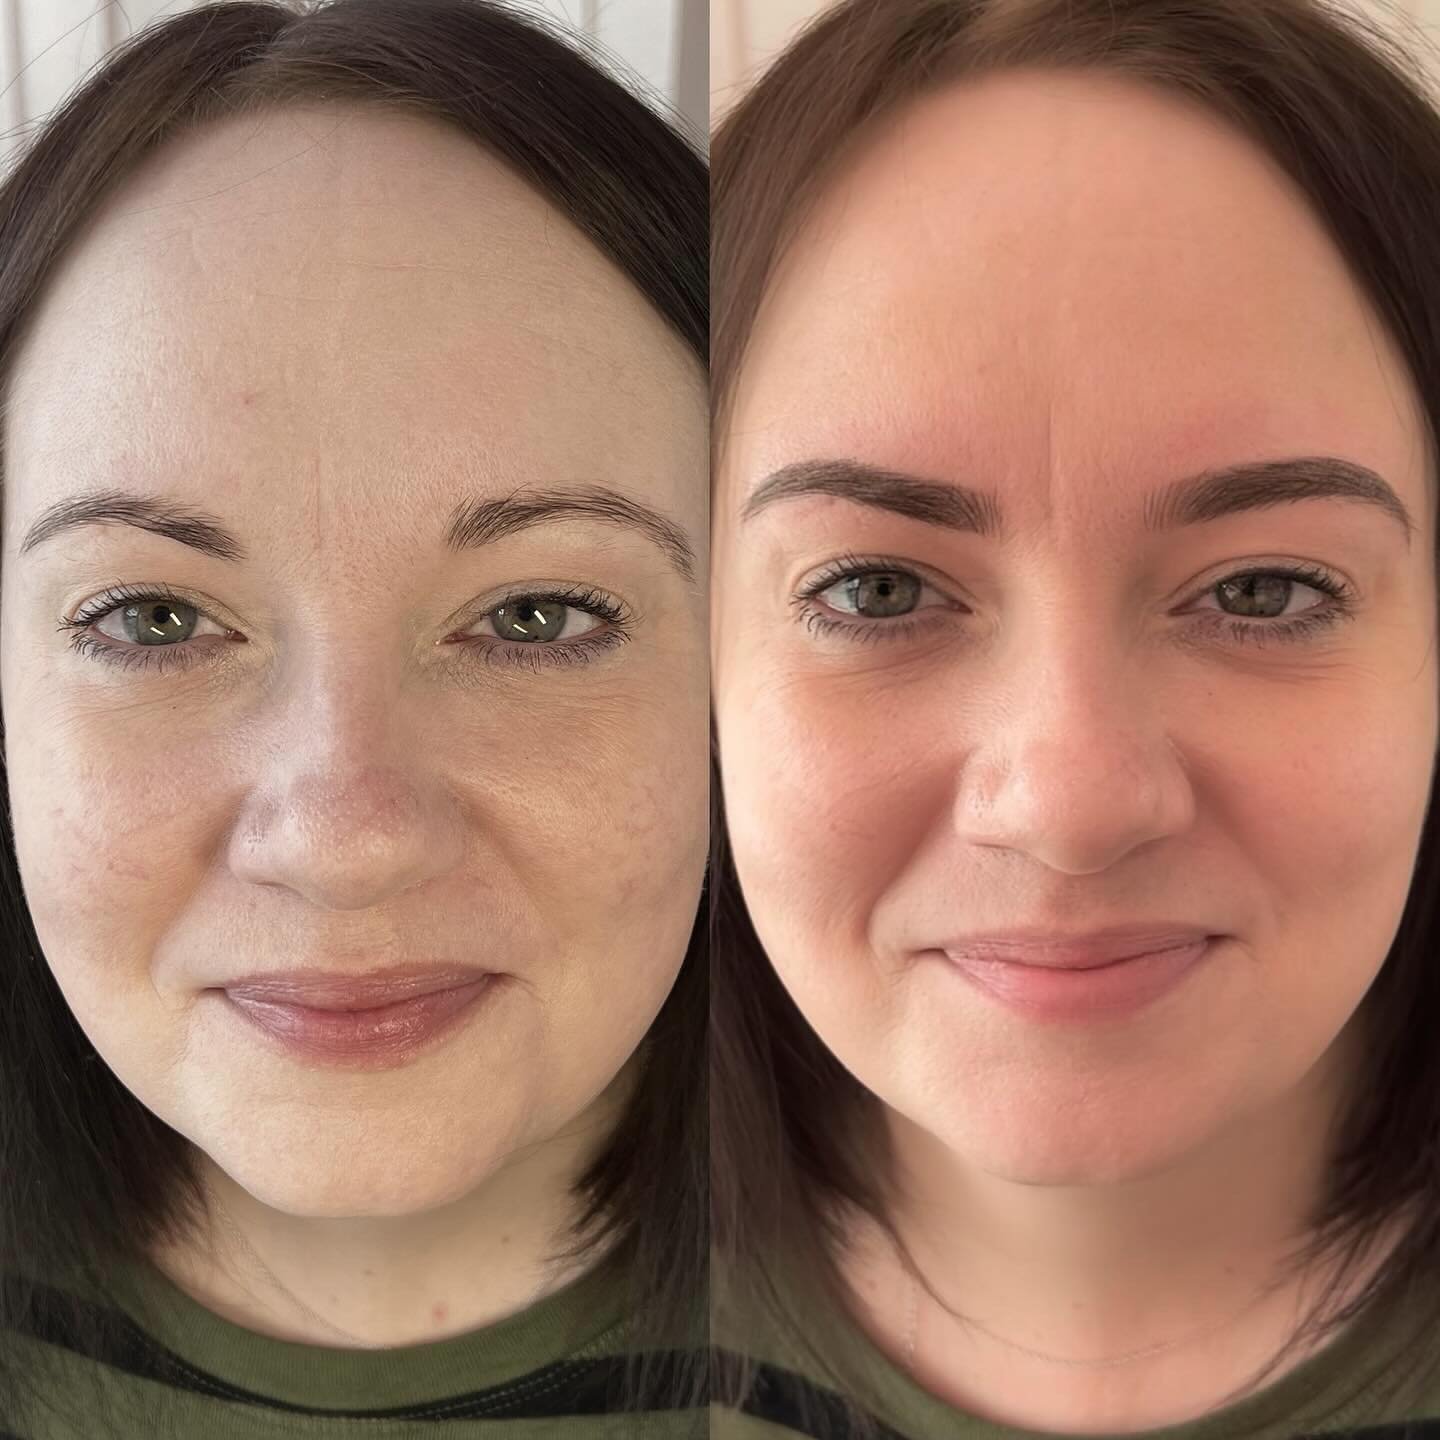 𝑪𝒐𝒎𝒃𝒊𝒏𝒂𝒕𝒐𝒏 𝑩𝒓𝒐𝒘𝒔.

My client Lisa is a natural beauty who wanted an enhancement that makeup couldn&rsquo;t achieve.

I balanced out the symmetry of the natural brows, lifted the arches and my client was so happy with her new look.

The